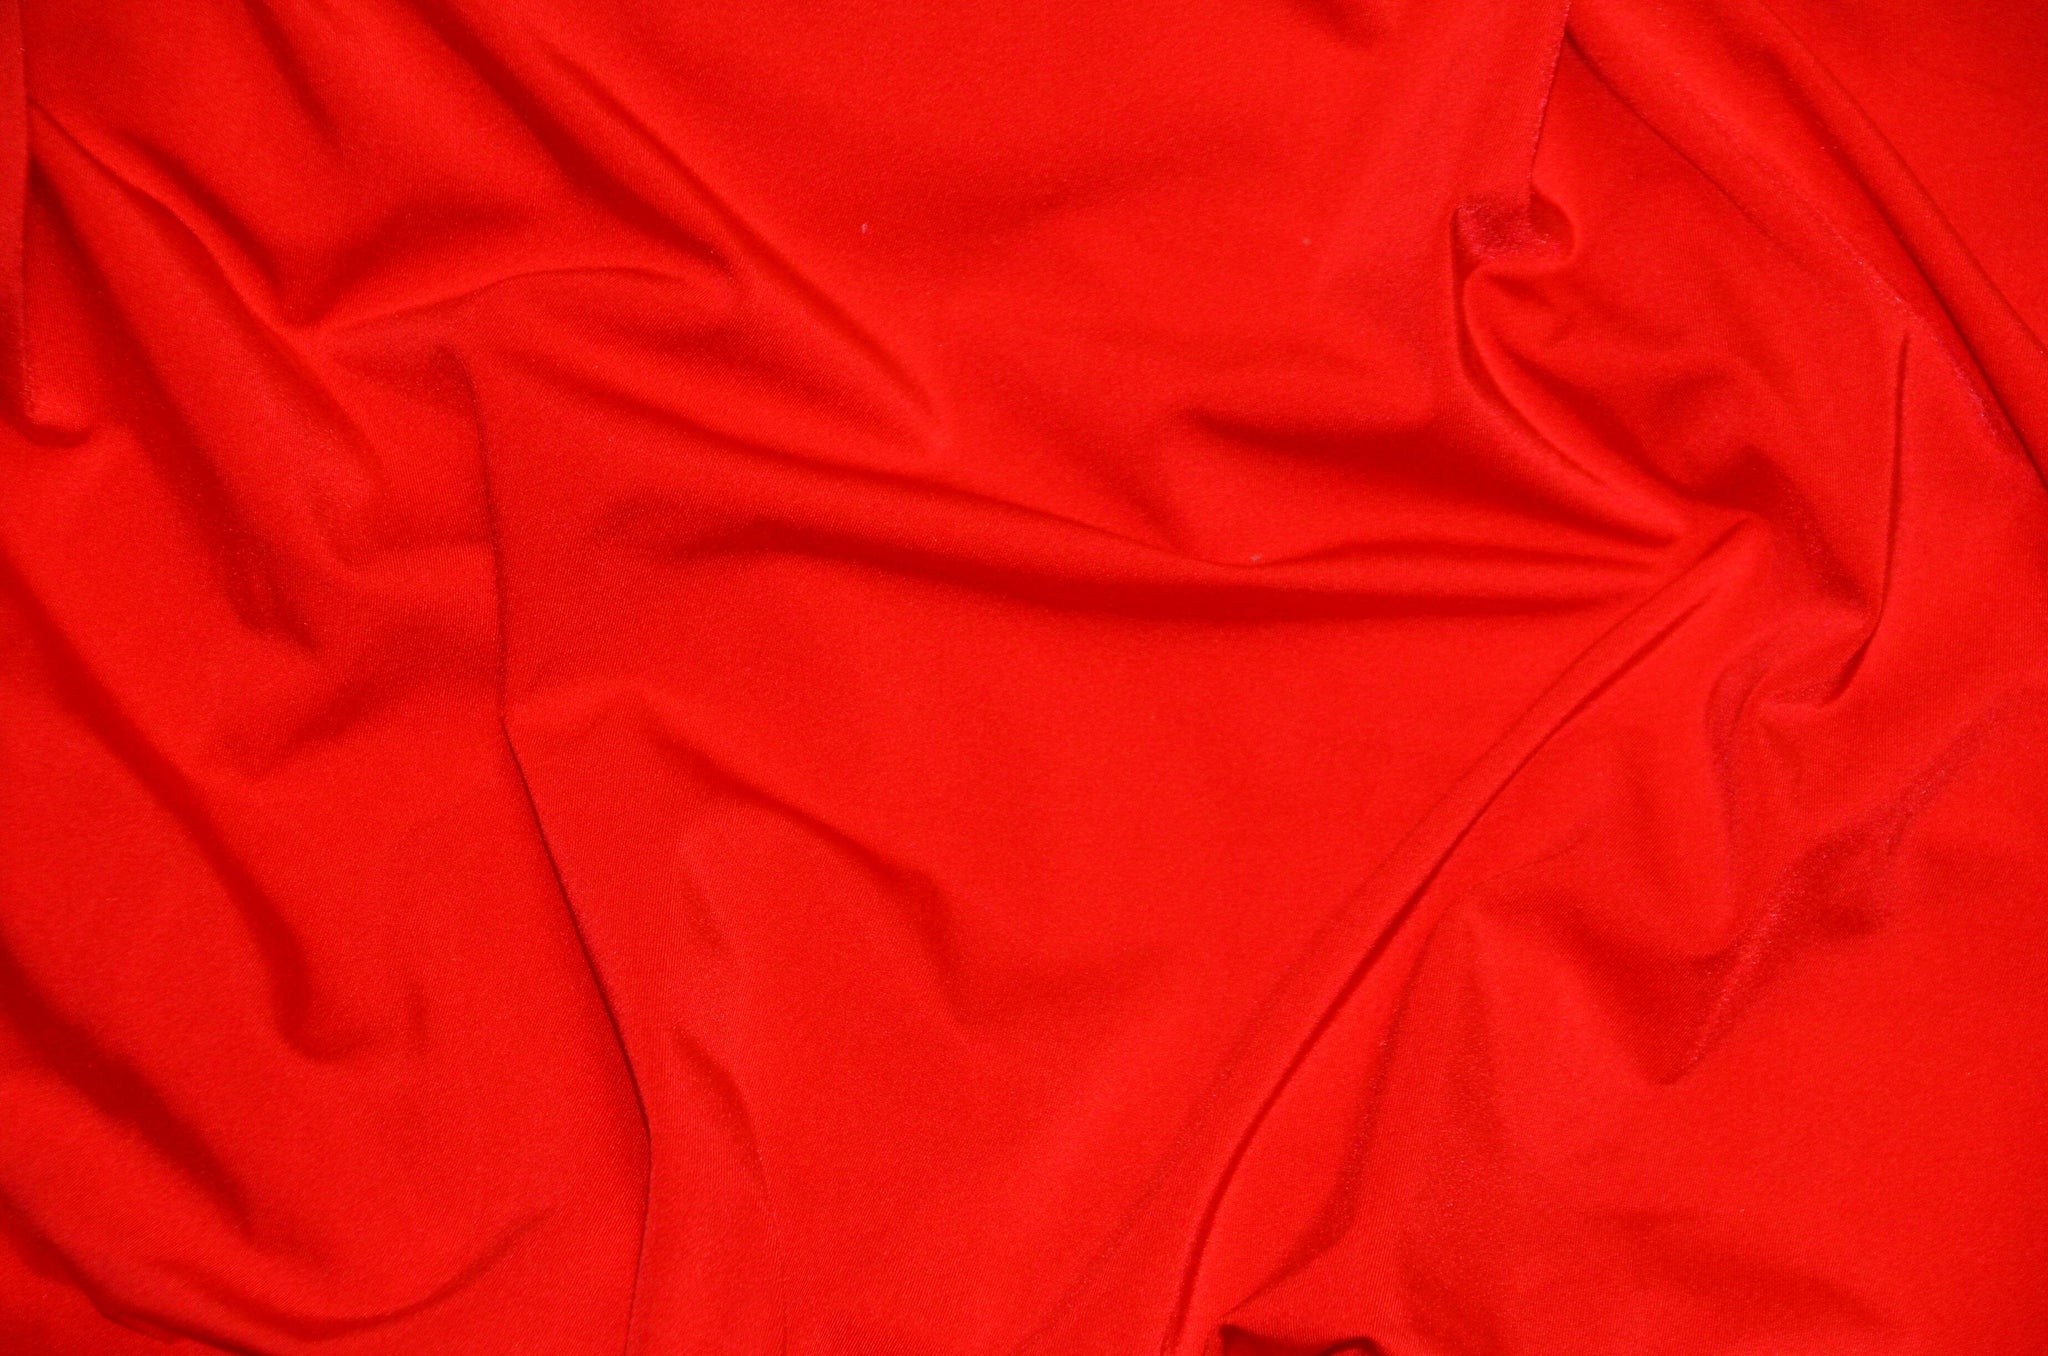 Buy Red Trippy Pant Cotton Lycra for Best Price, Reviews, Free Shipping